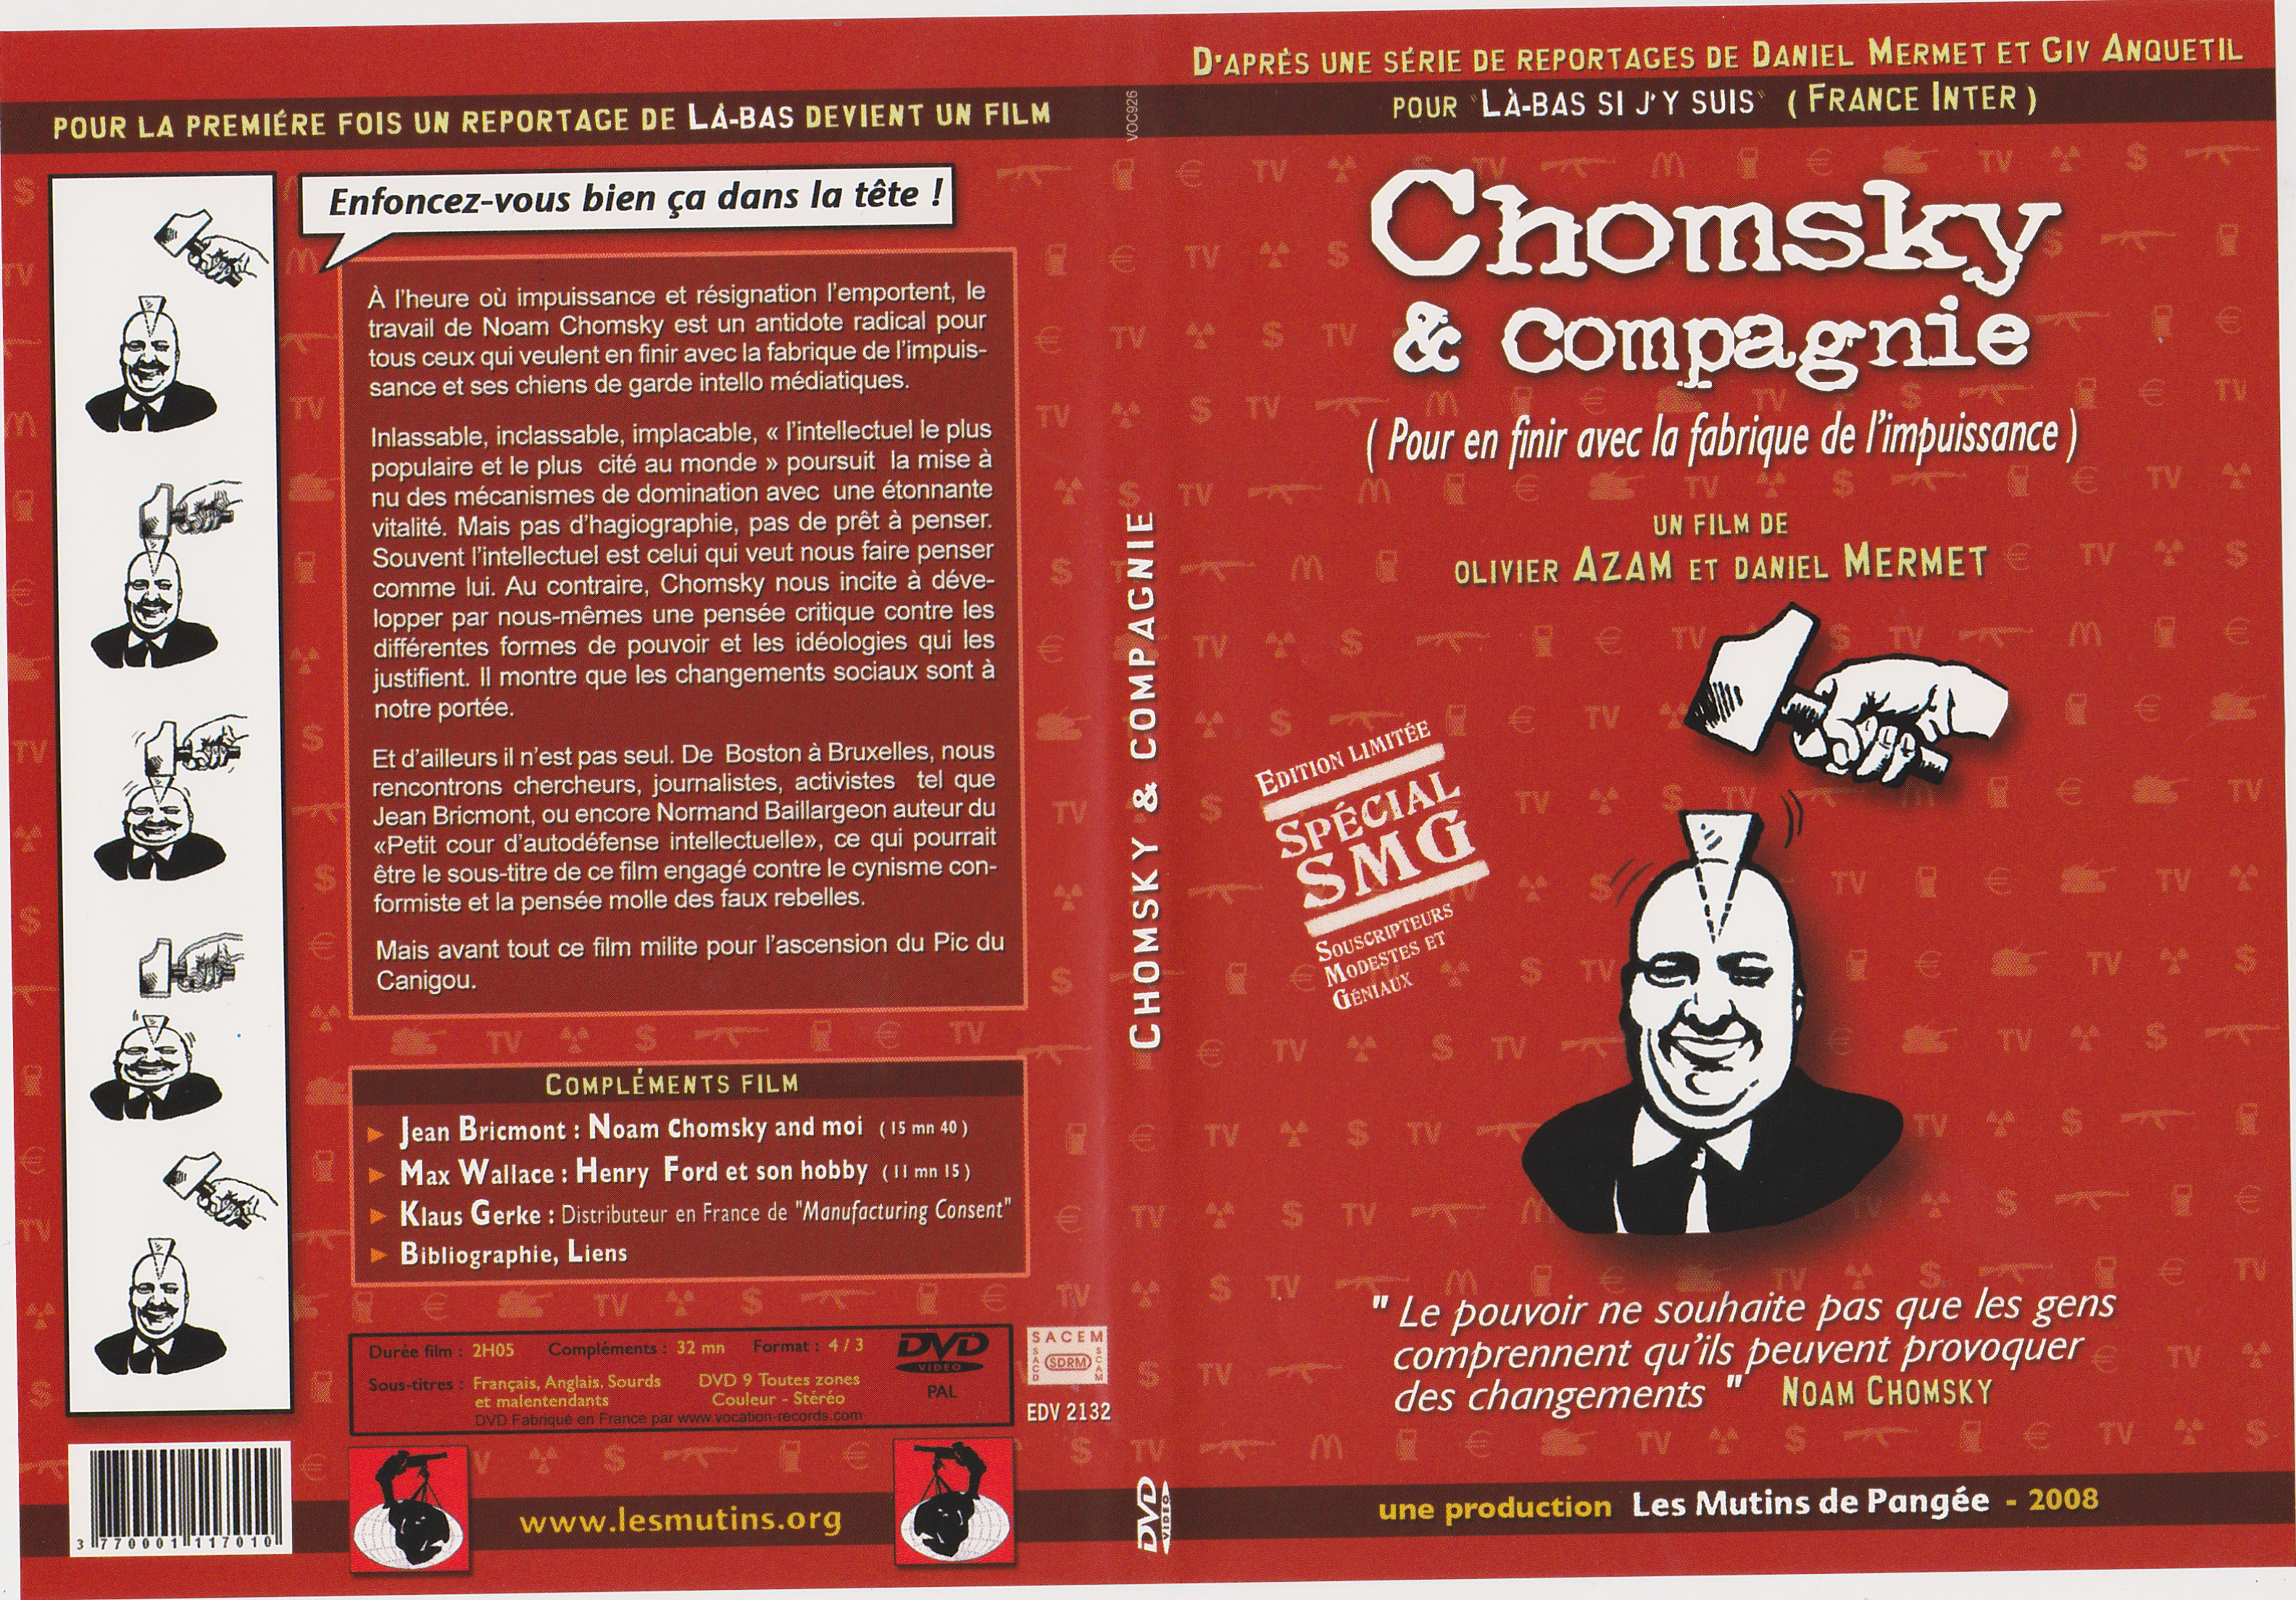 Jaquette DVD Chomsky & Compagnie